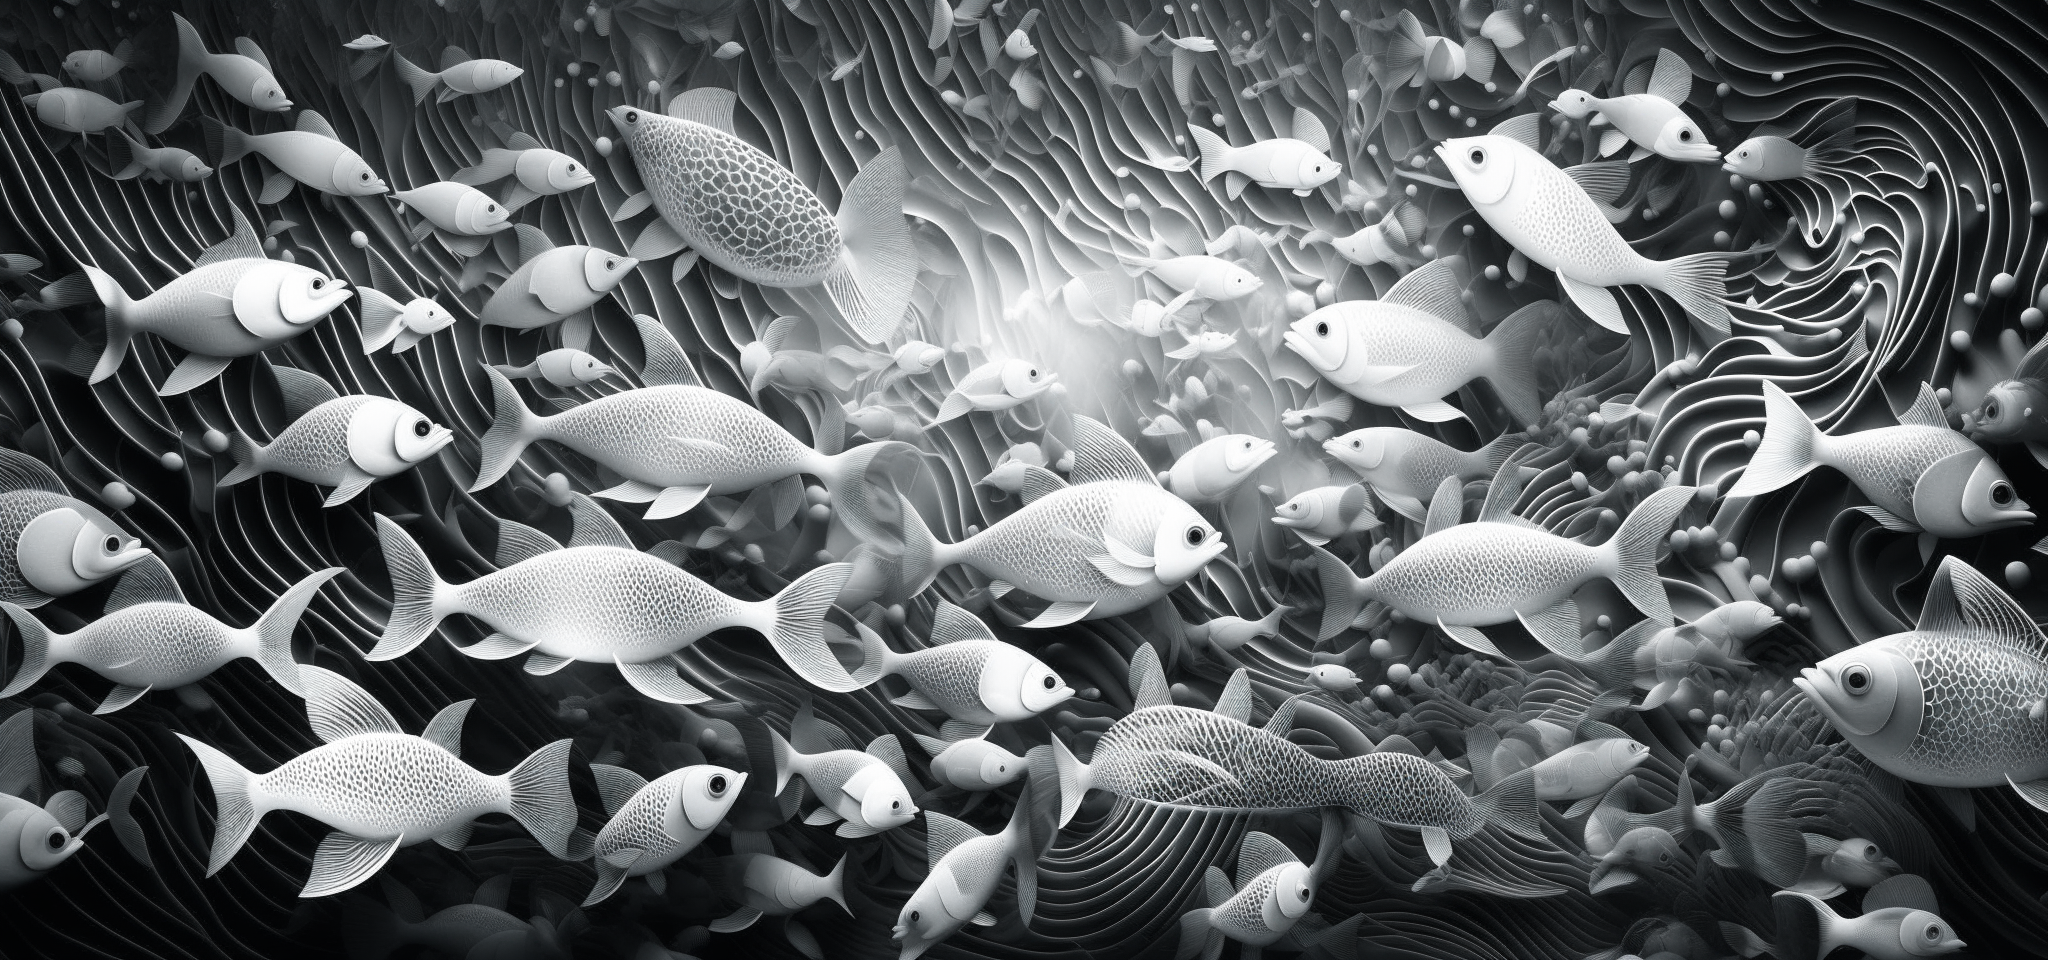 post background, dark theme, fractals, abstract, space, very light white and gray colors, fishes on the background